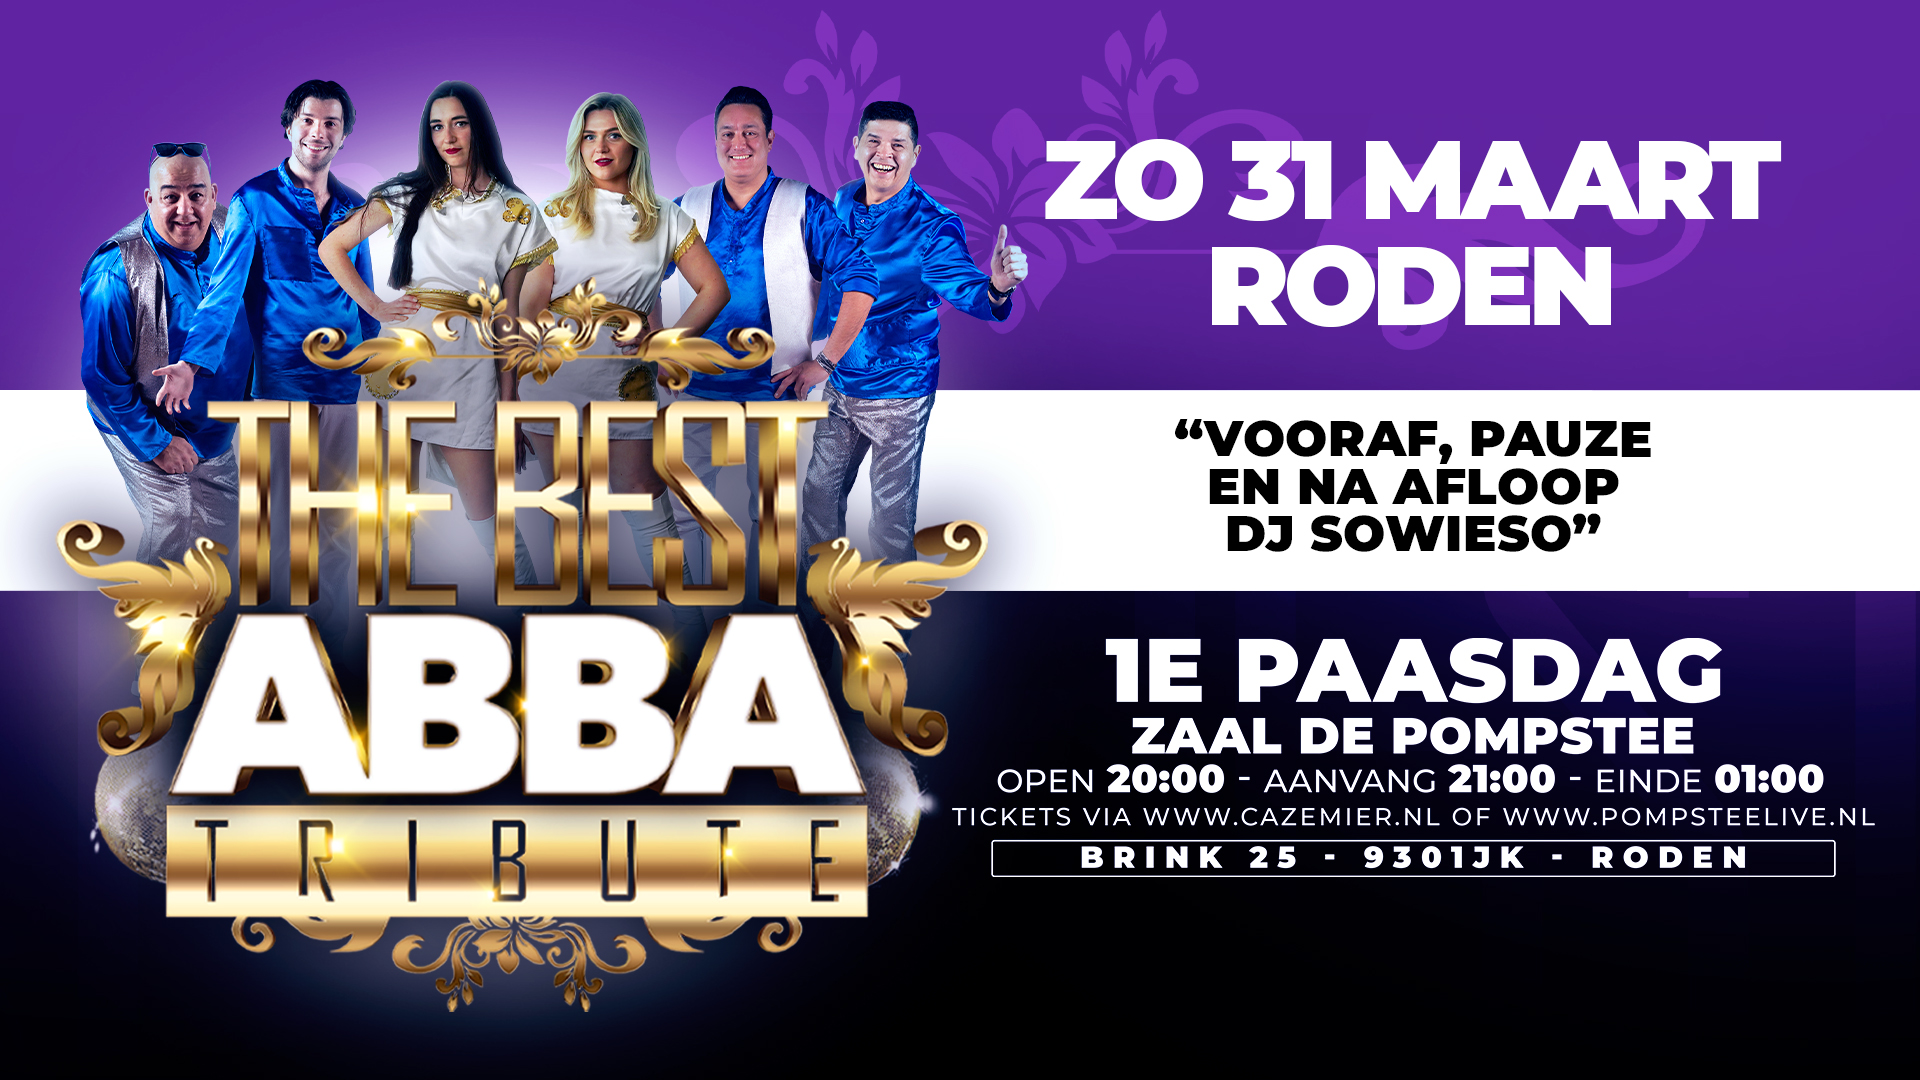 ABBA Tribute Live in Roden